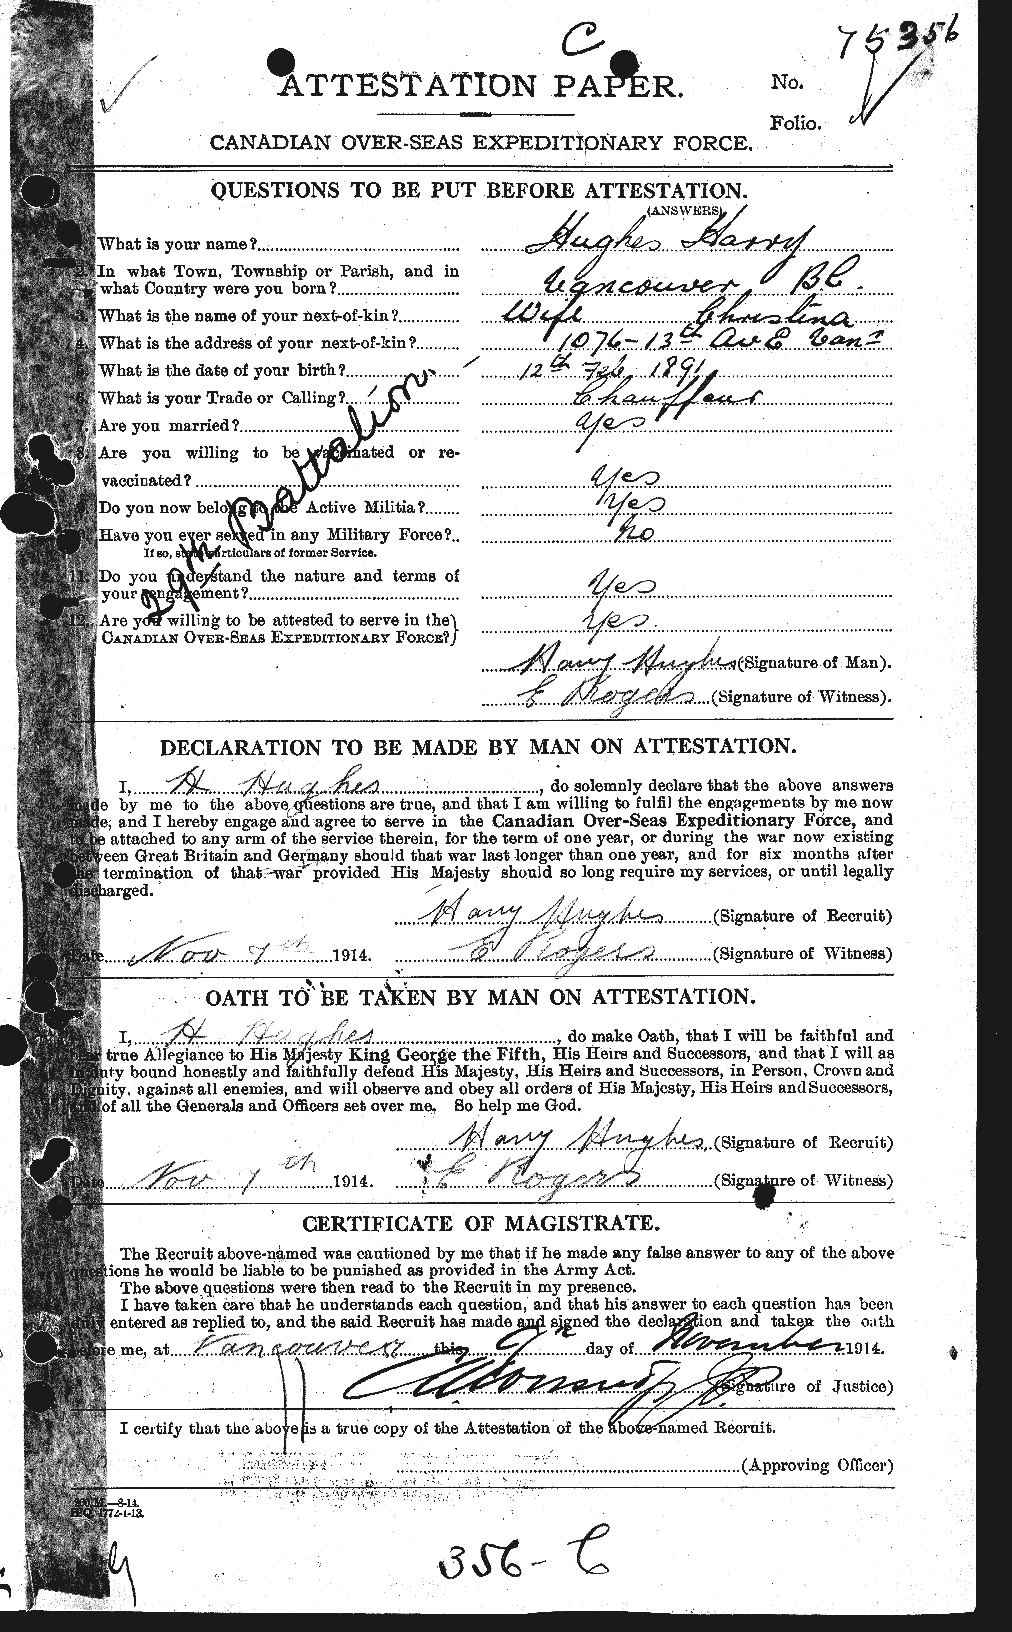 Personnel Records of the First World War - CEF 403864a